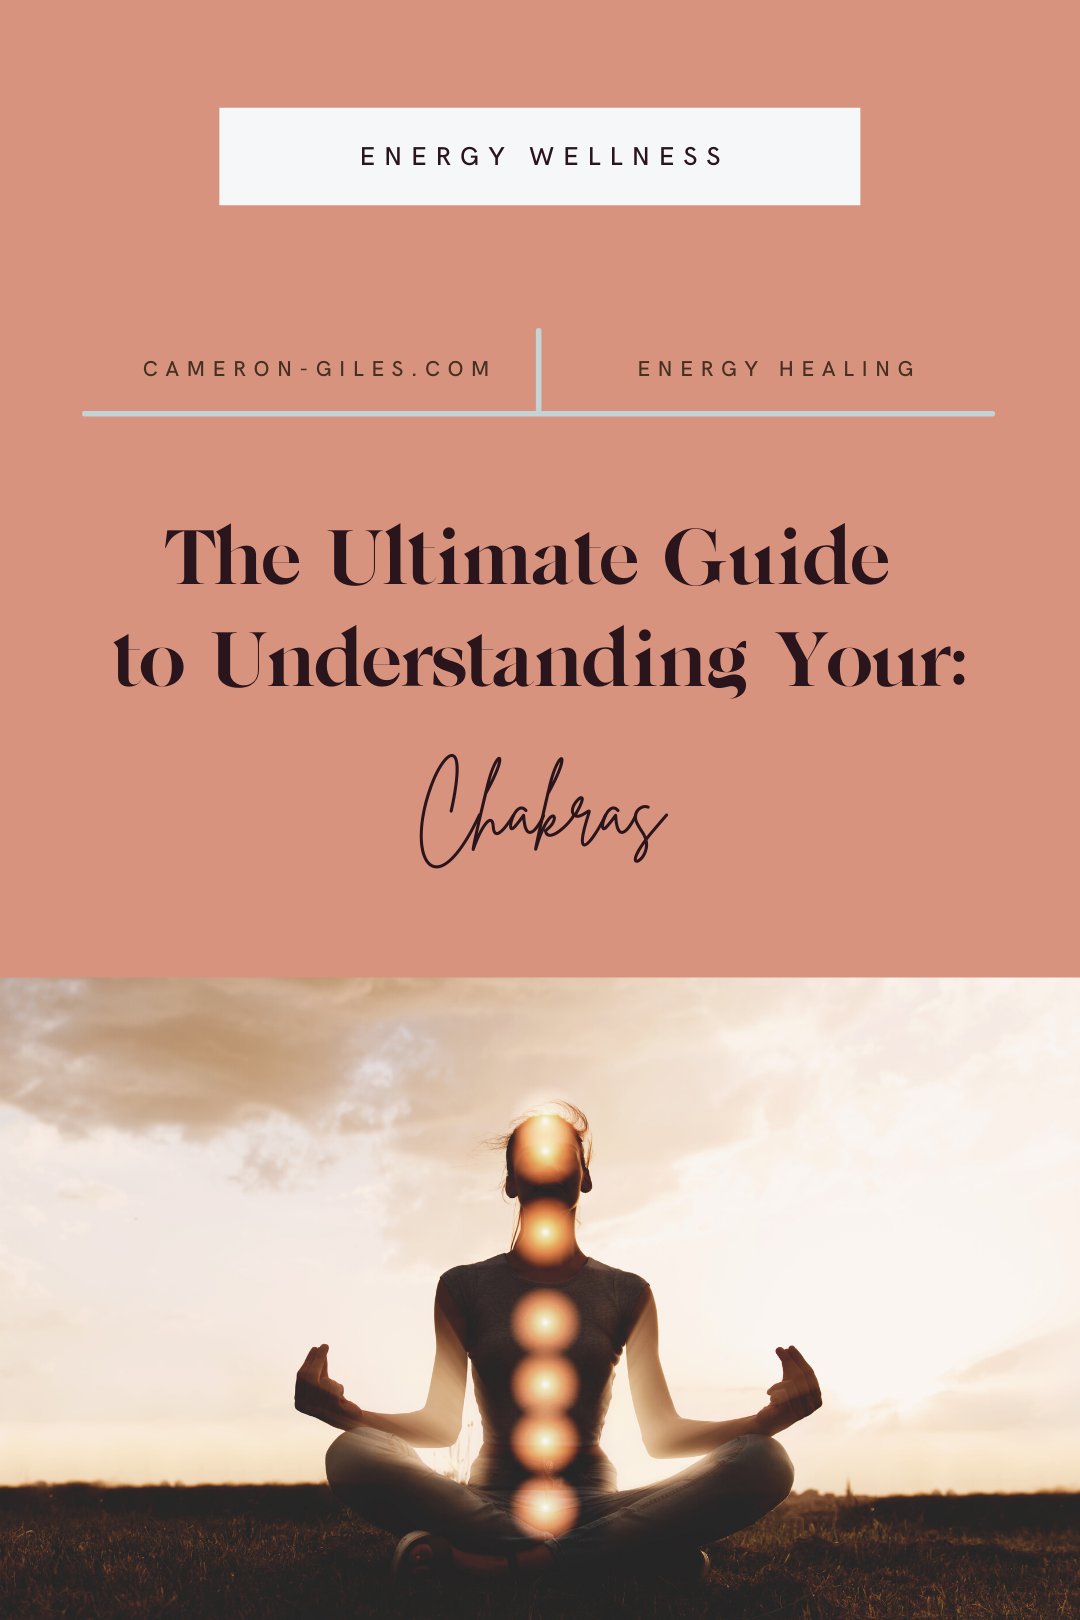 The ultimate guide to understanding your chakras